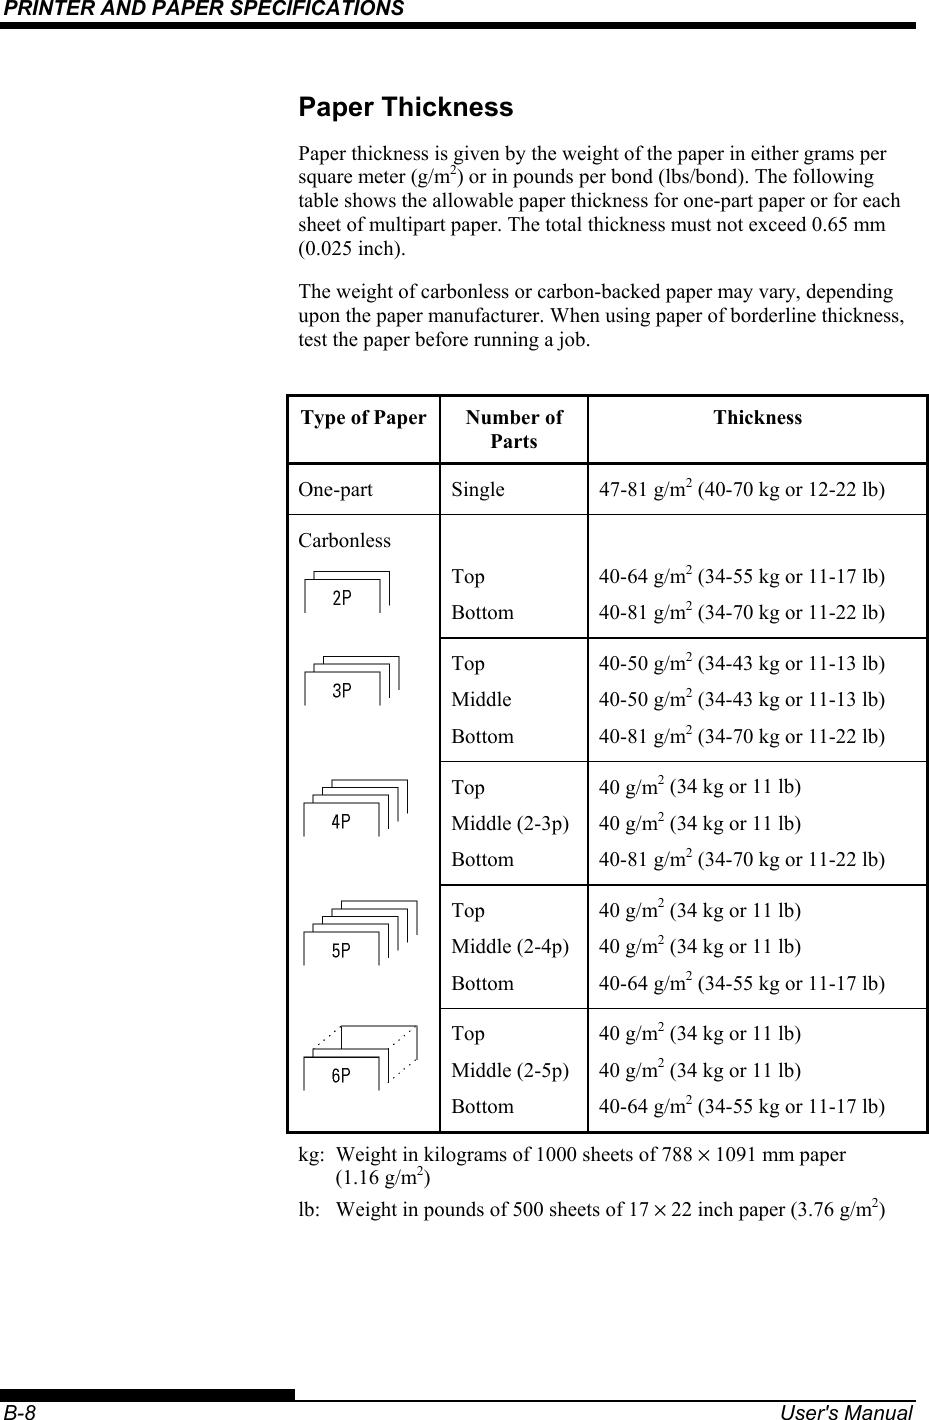 PRINTER AND PAPER SPECIFICATIONS    B-8  User&apos;s Manual Paper Thickness Paper thickness is given by the weight of the paper in either grams per square meter (g/m2) or in pounds per bond (lbs/bond). The following table shows the allowable paper thickness for one-part paper or for each sheet of multipart paper. The total thickness must not exceed 0.65 mm (0.025 inch). The weight of carbonless or carbon-backed paper may vary, depending upon the paper manufacturer. When using paper of borderline thickness, test the paper before running a job.  Type of Paper  Number of Parts Thickness One-part Single  47-81 g/m2 (40-70 kg or 12-22 lb) Carbonless   Top Bottom  40-64 g/m2 (34-55 kg or 11-17 lb) 40-81 g/m2 (34-70 kg or 11-22 lb)  Top Middle Bottom 40-50 g/m2 (34-43 kg or 11-13 lb) 40-50 g/m2 (34-43 kg or 11-13 lb) 40-81 g/m2 (34-70 kg or 11-22 lb)  Top Middle (2-3p) Bottom 40 g/m2 (34 kg or 11 lb) 40 g/m2 (34 kg or 11 lb) 40-81 g/m2 (34-70 kg or 11-22 lb)  Top Middle (2-4p) Bottom 40 g/m2 (34 kg or 11 lb) 40 g/m2 (34 kg or 11 lb) 40-64 g/m2 (34-55 kg or 11-17 lb)  Top Middle (2-5p) Bottom 40 g/m2 (34 kg or 11 lb) 40 g/m2 (34 kg or 11 lb) 40-64 g/m2 (34-55 kg or 11-17 lb) kg:  Weight in kilograms of 1000 sheets of 788 × 1091 mm paper (1.16 g/m2) lb:  Weight in pounds of 500 sheets of 17 × 22 inch paper (3.76 g/m2) 